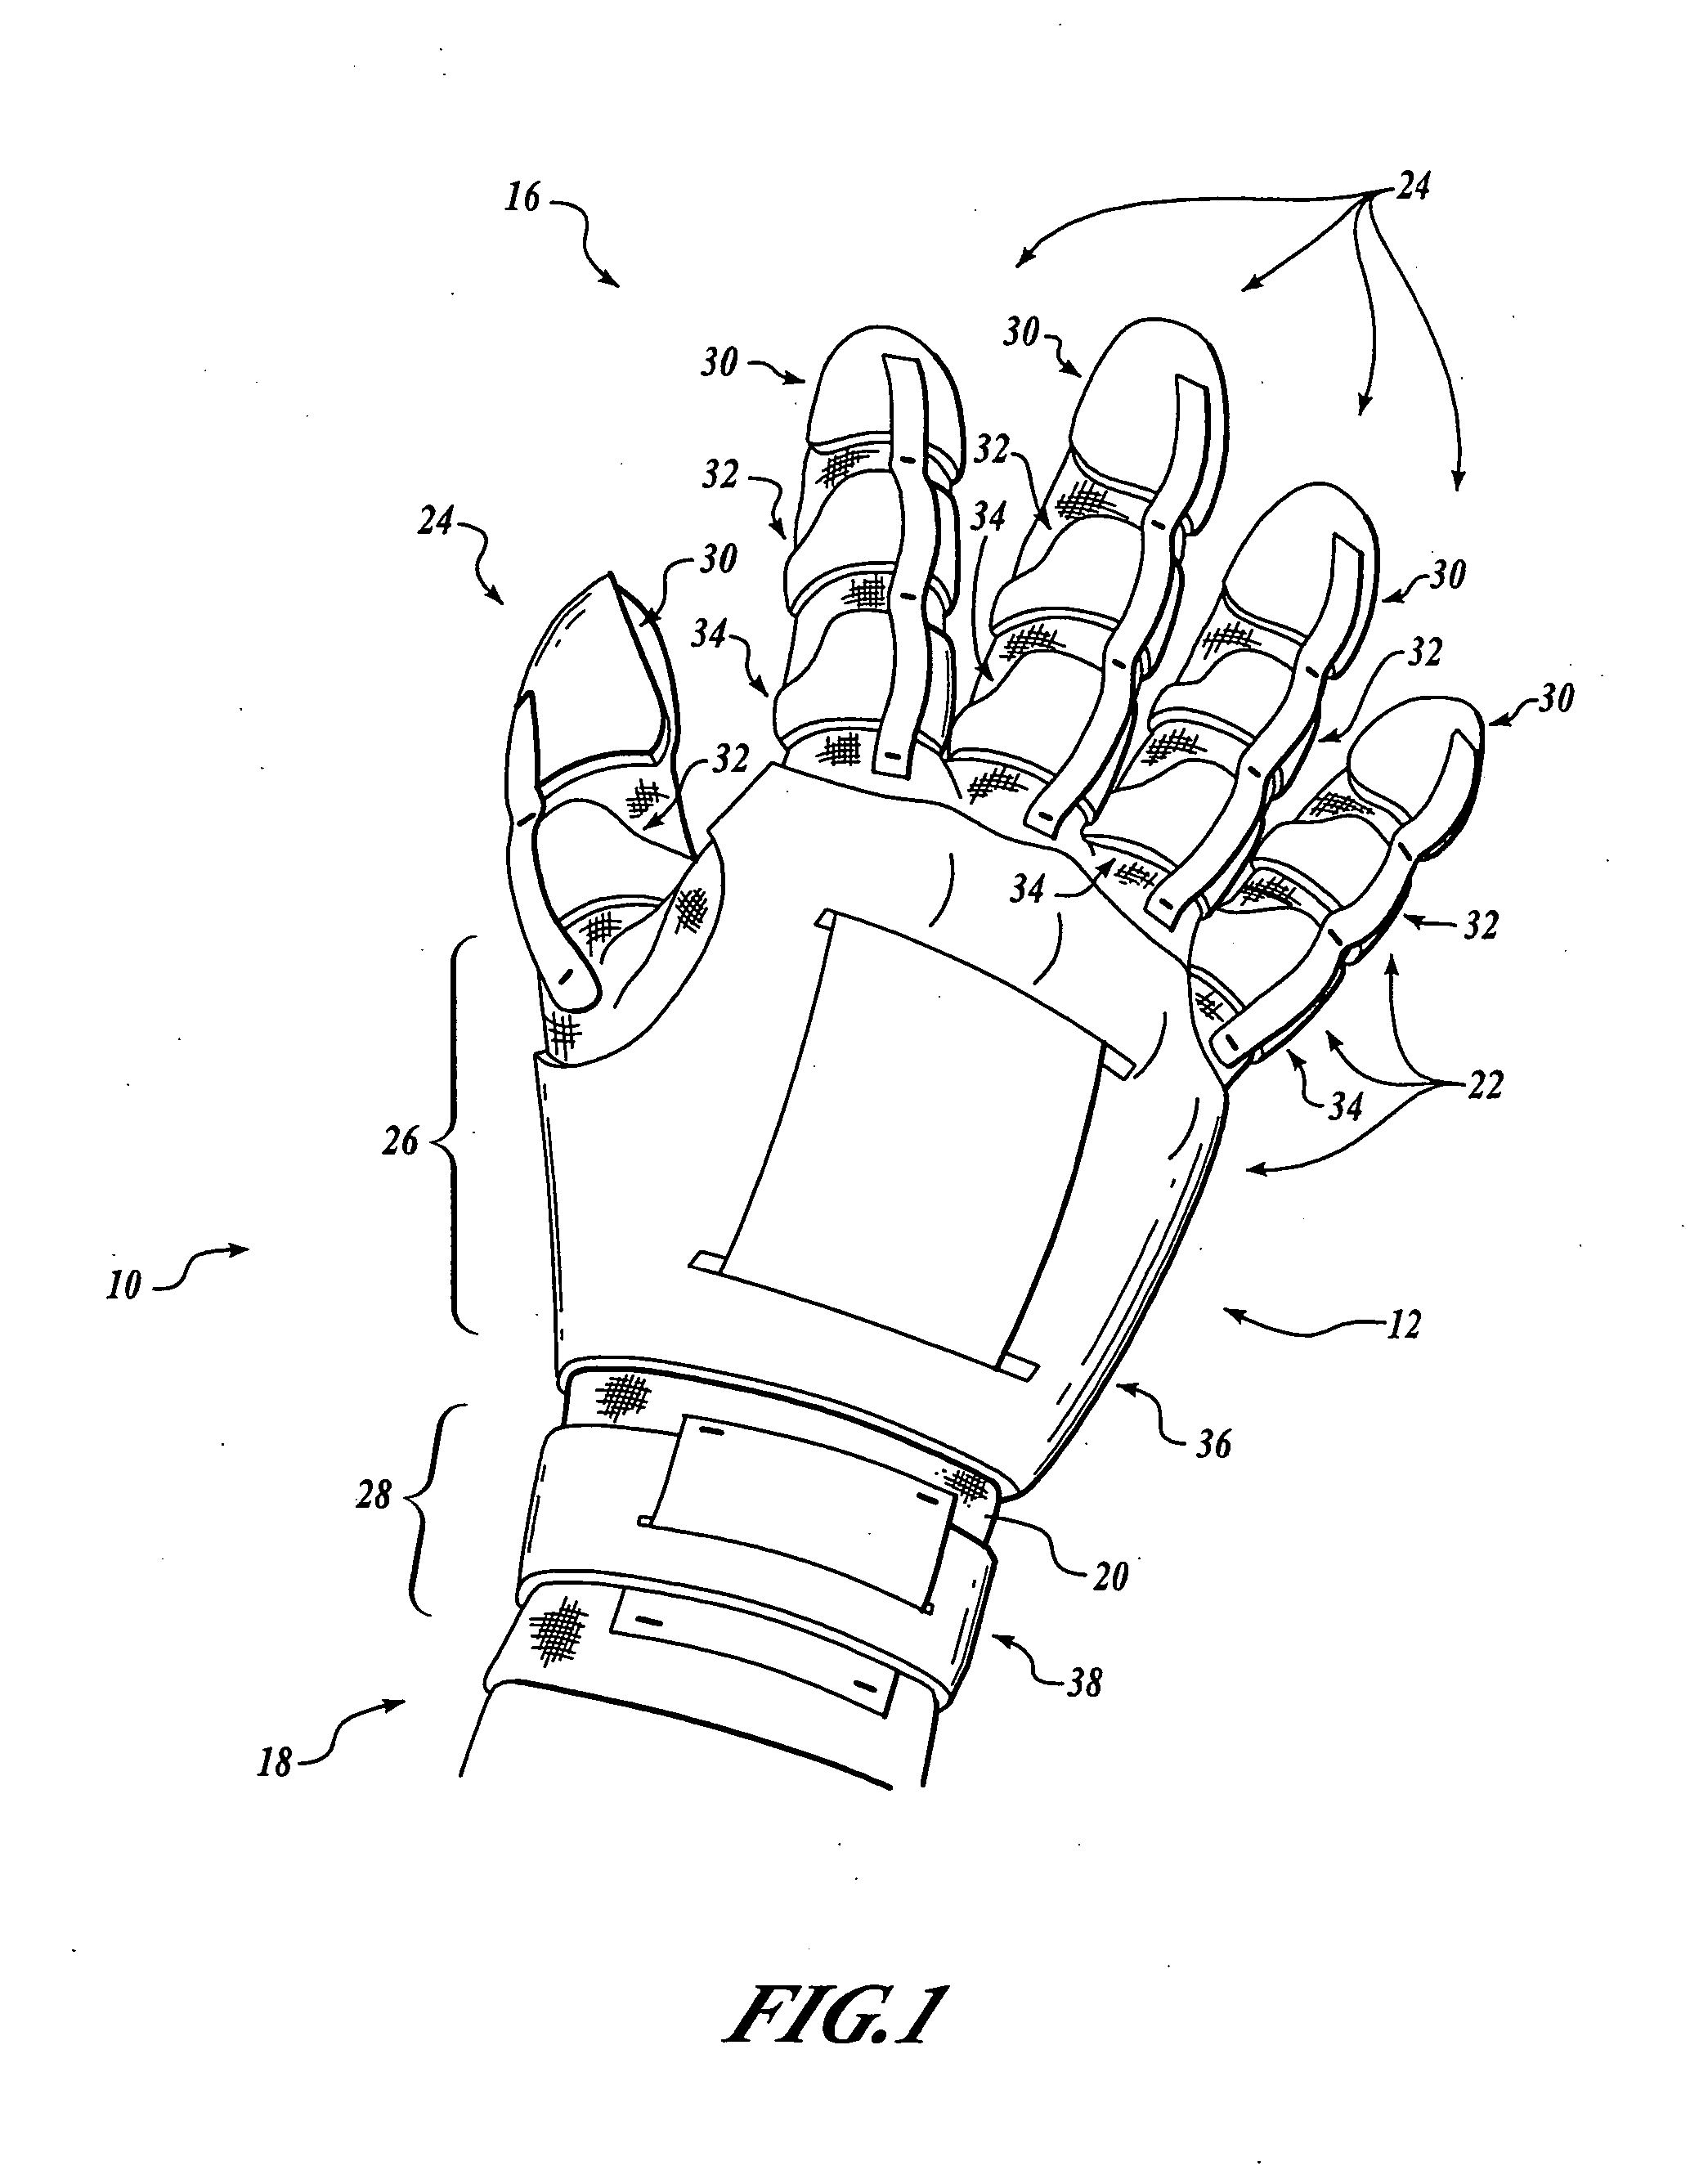 Reinforced protective glove